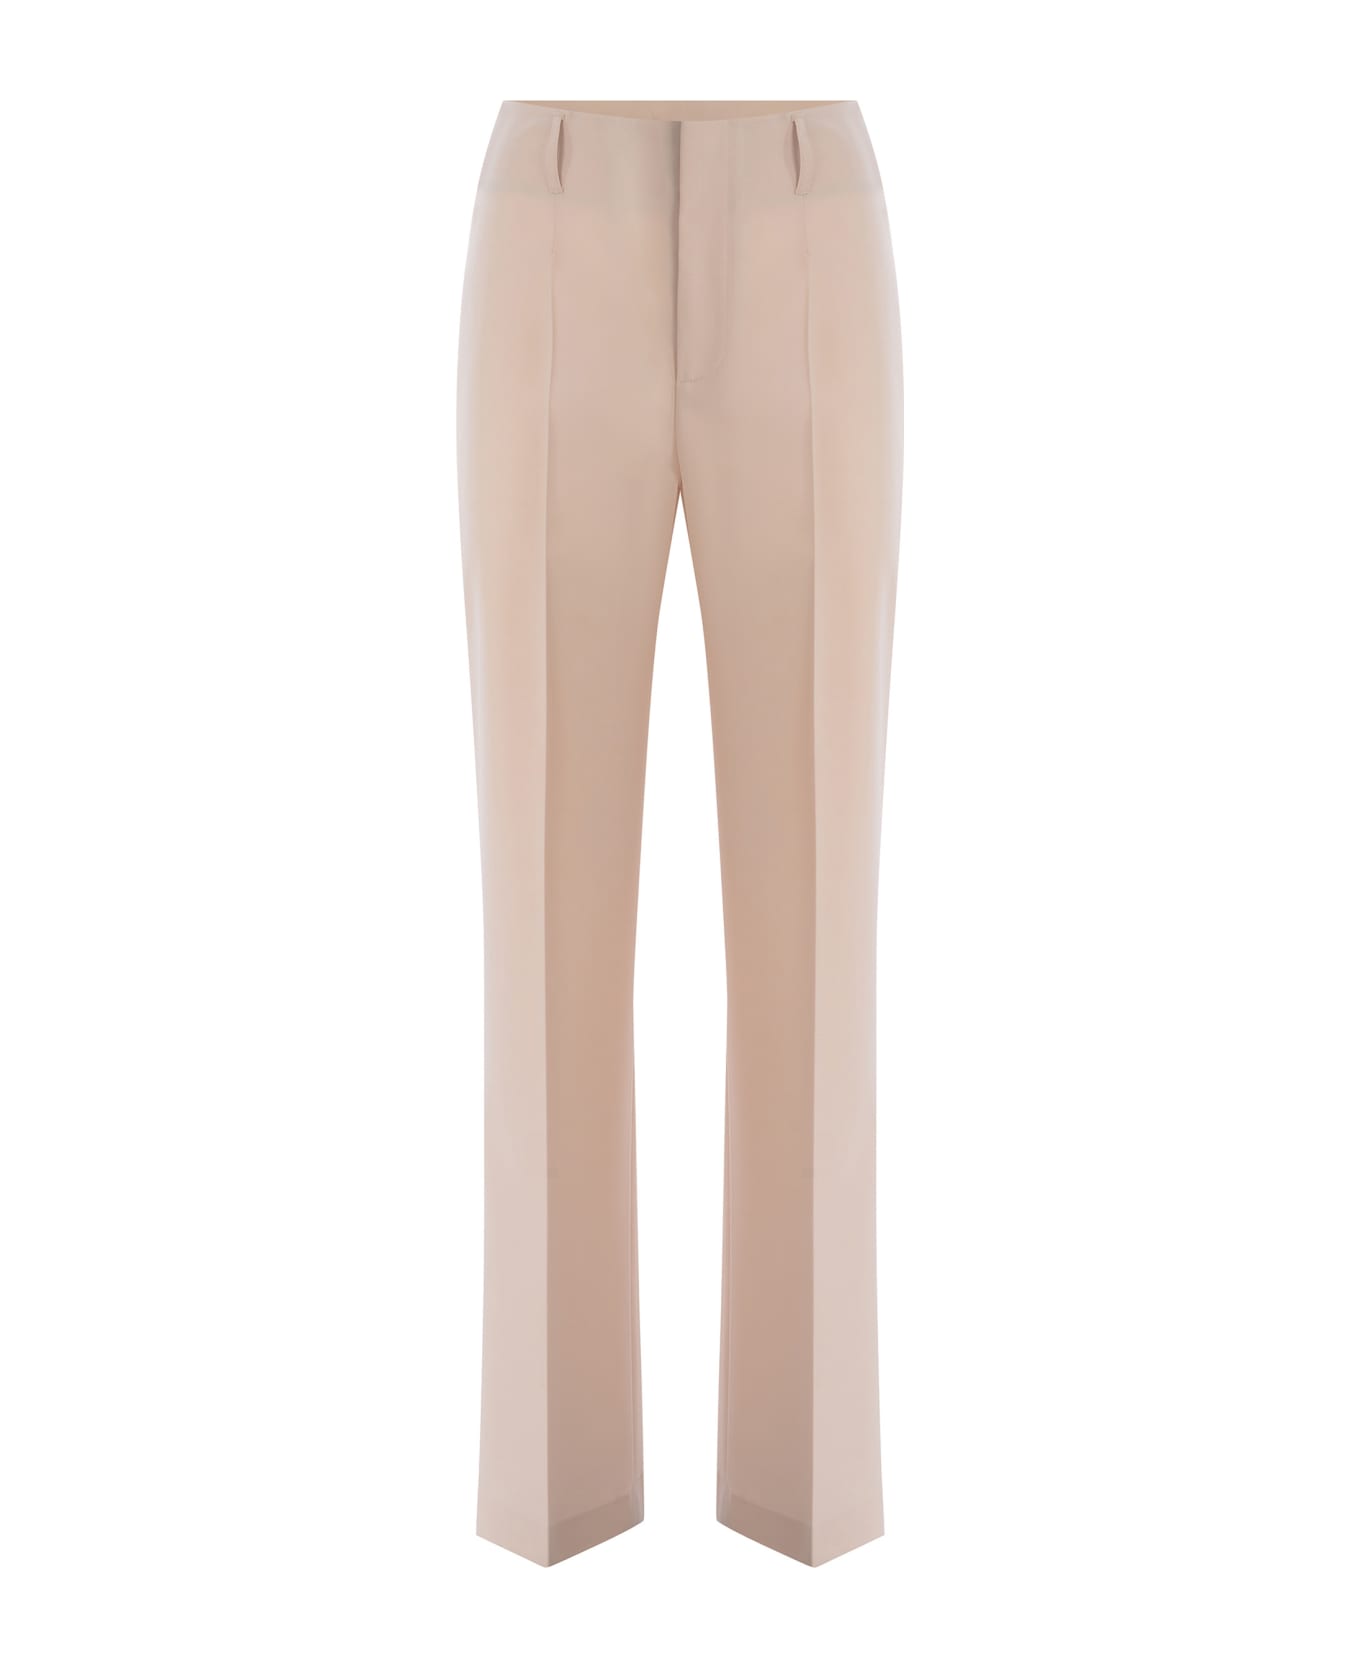 Philosophy di Lorenzo Serafini Trousers Philosophy Made Of Light Wool Canvas - Rosa cipria ボトムス